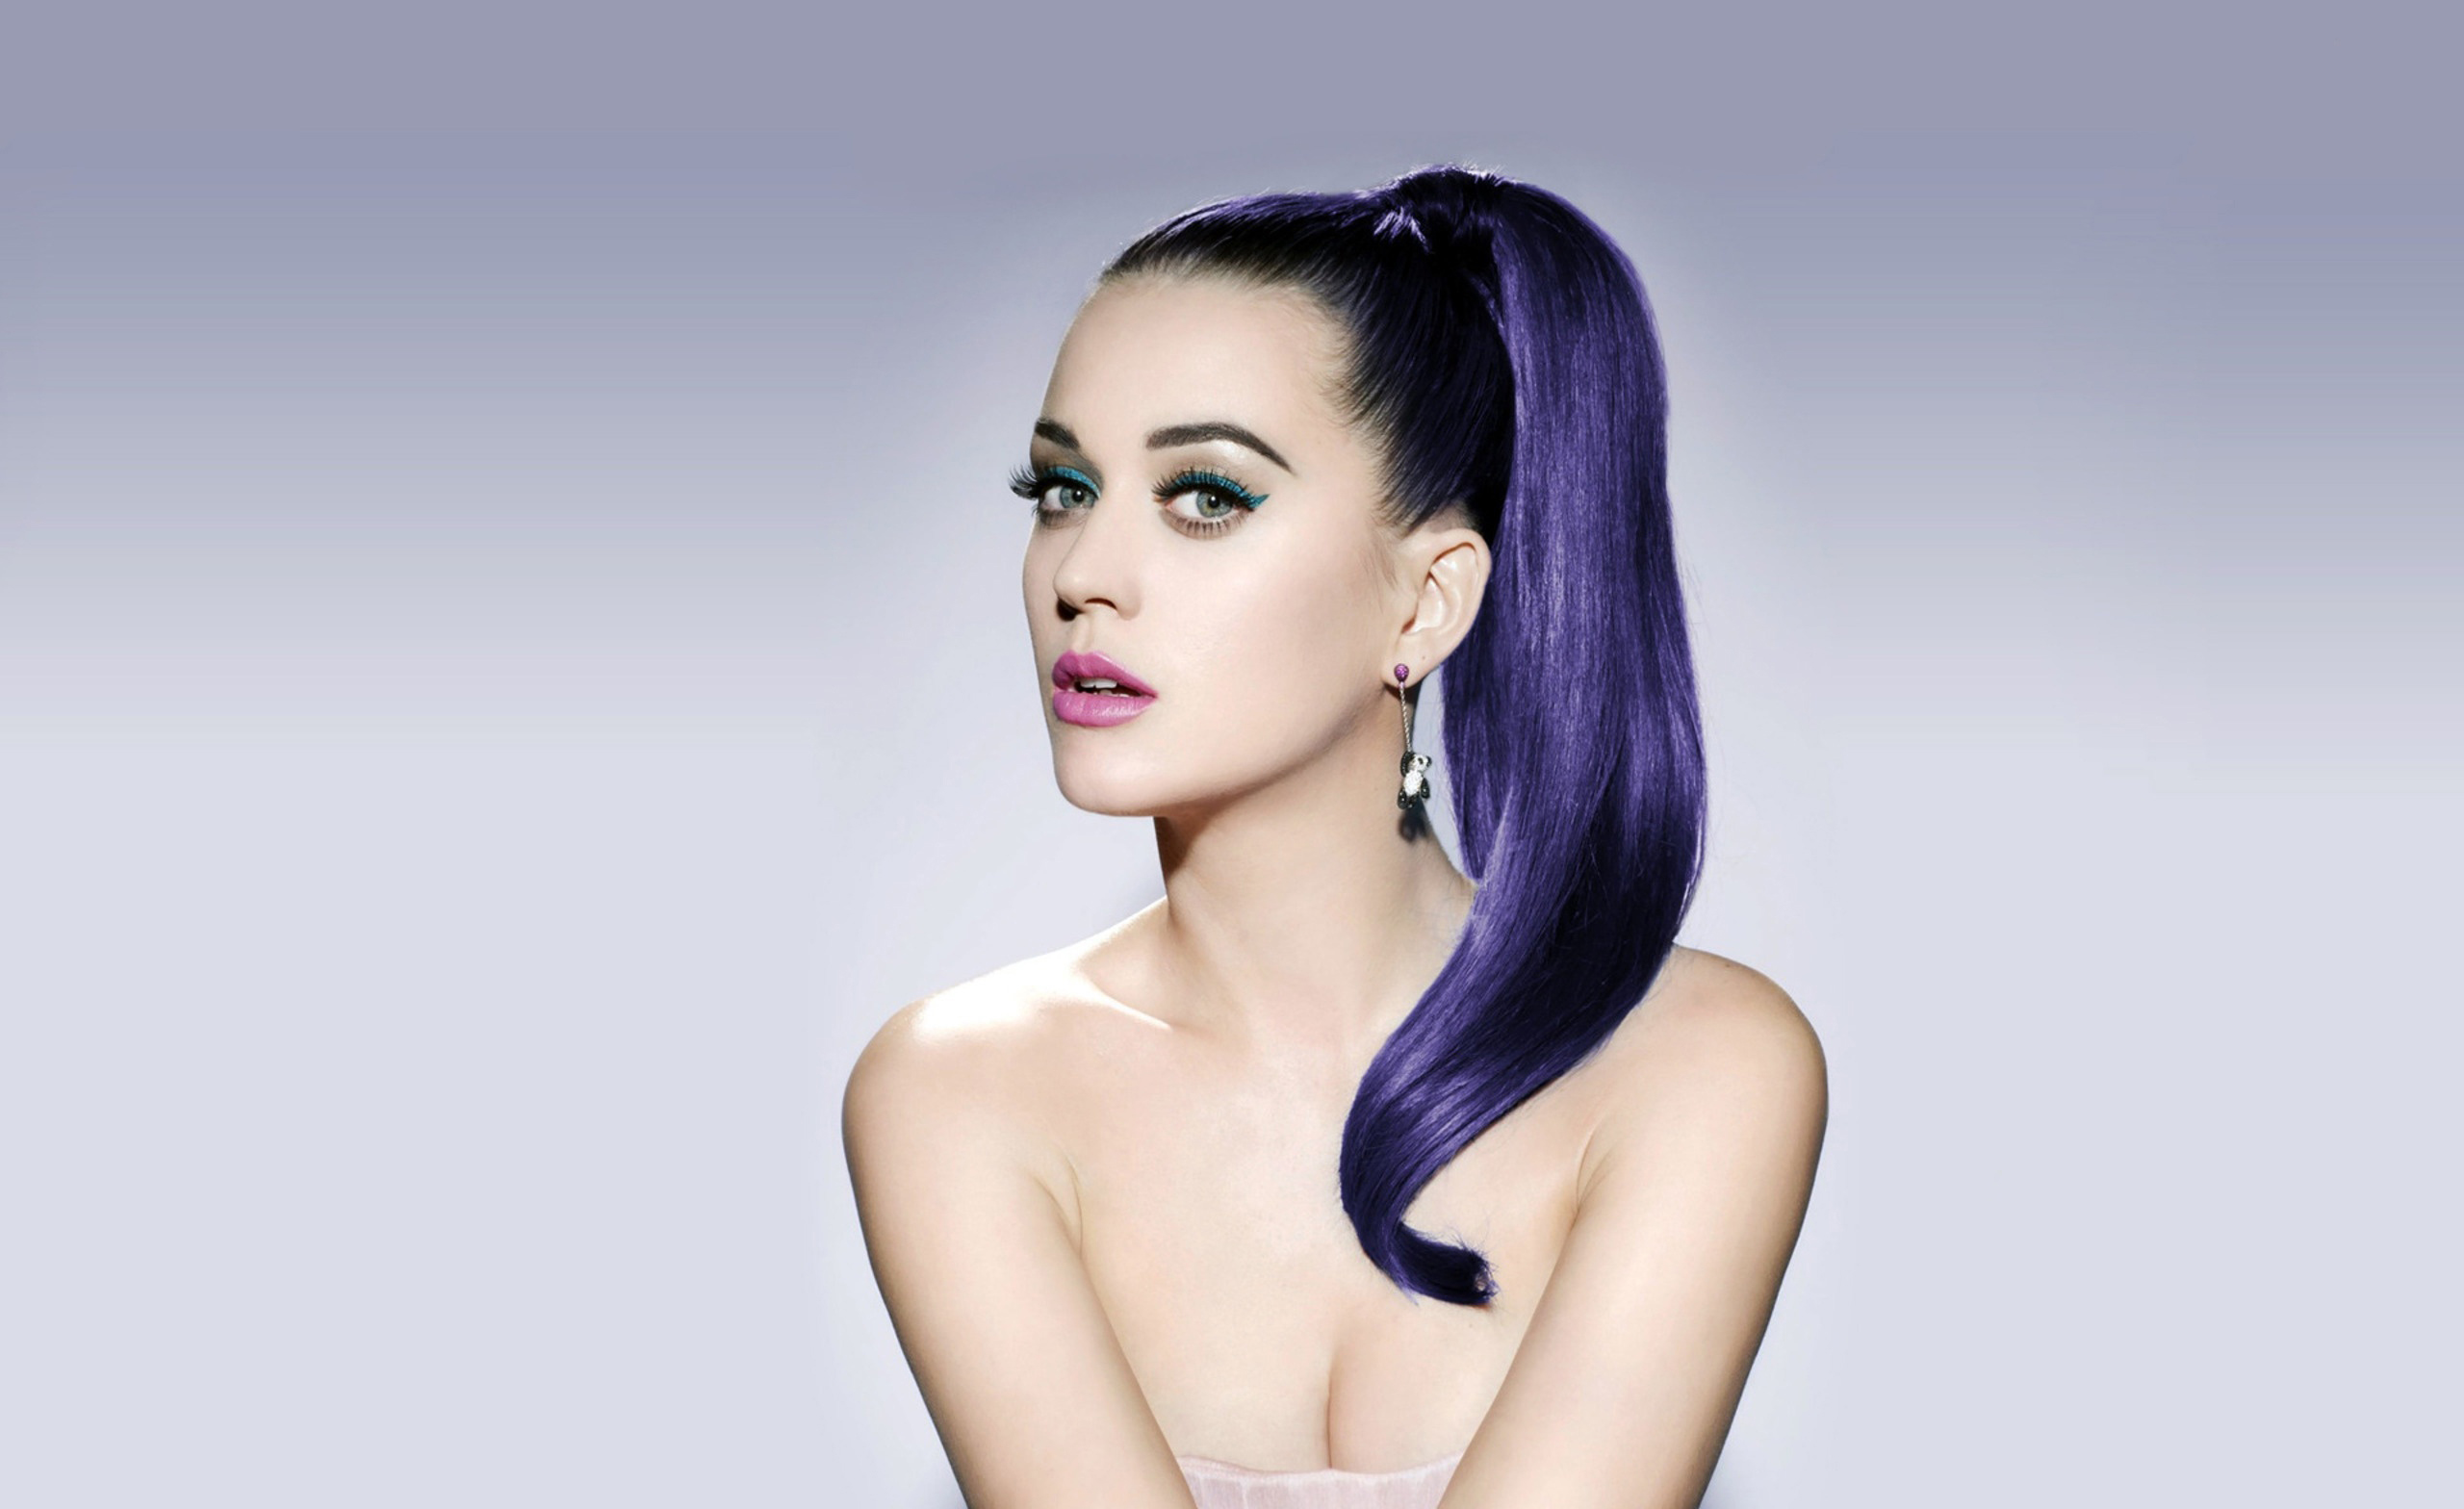 2560x1440 Resolution Katy Perry Stunning Wallpapers 1440p Resolution Wallpaper Wallpapers Den 